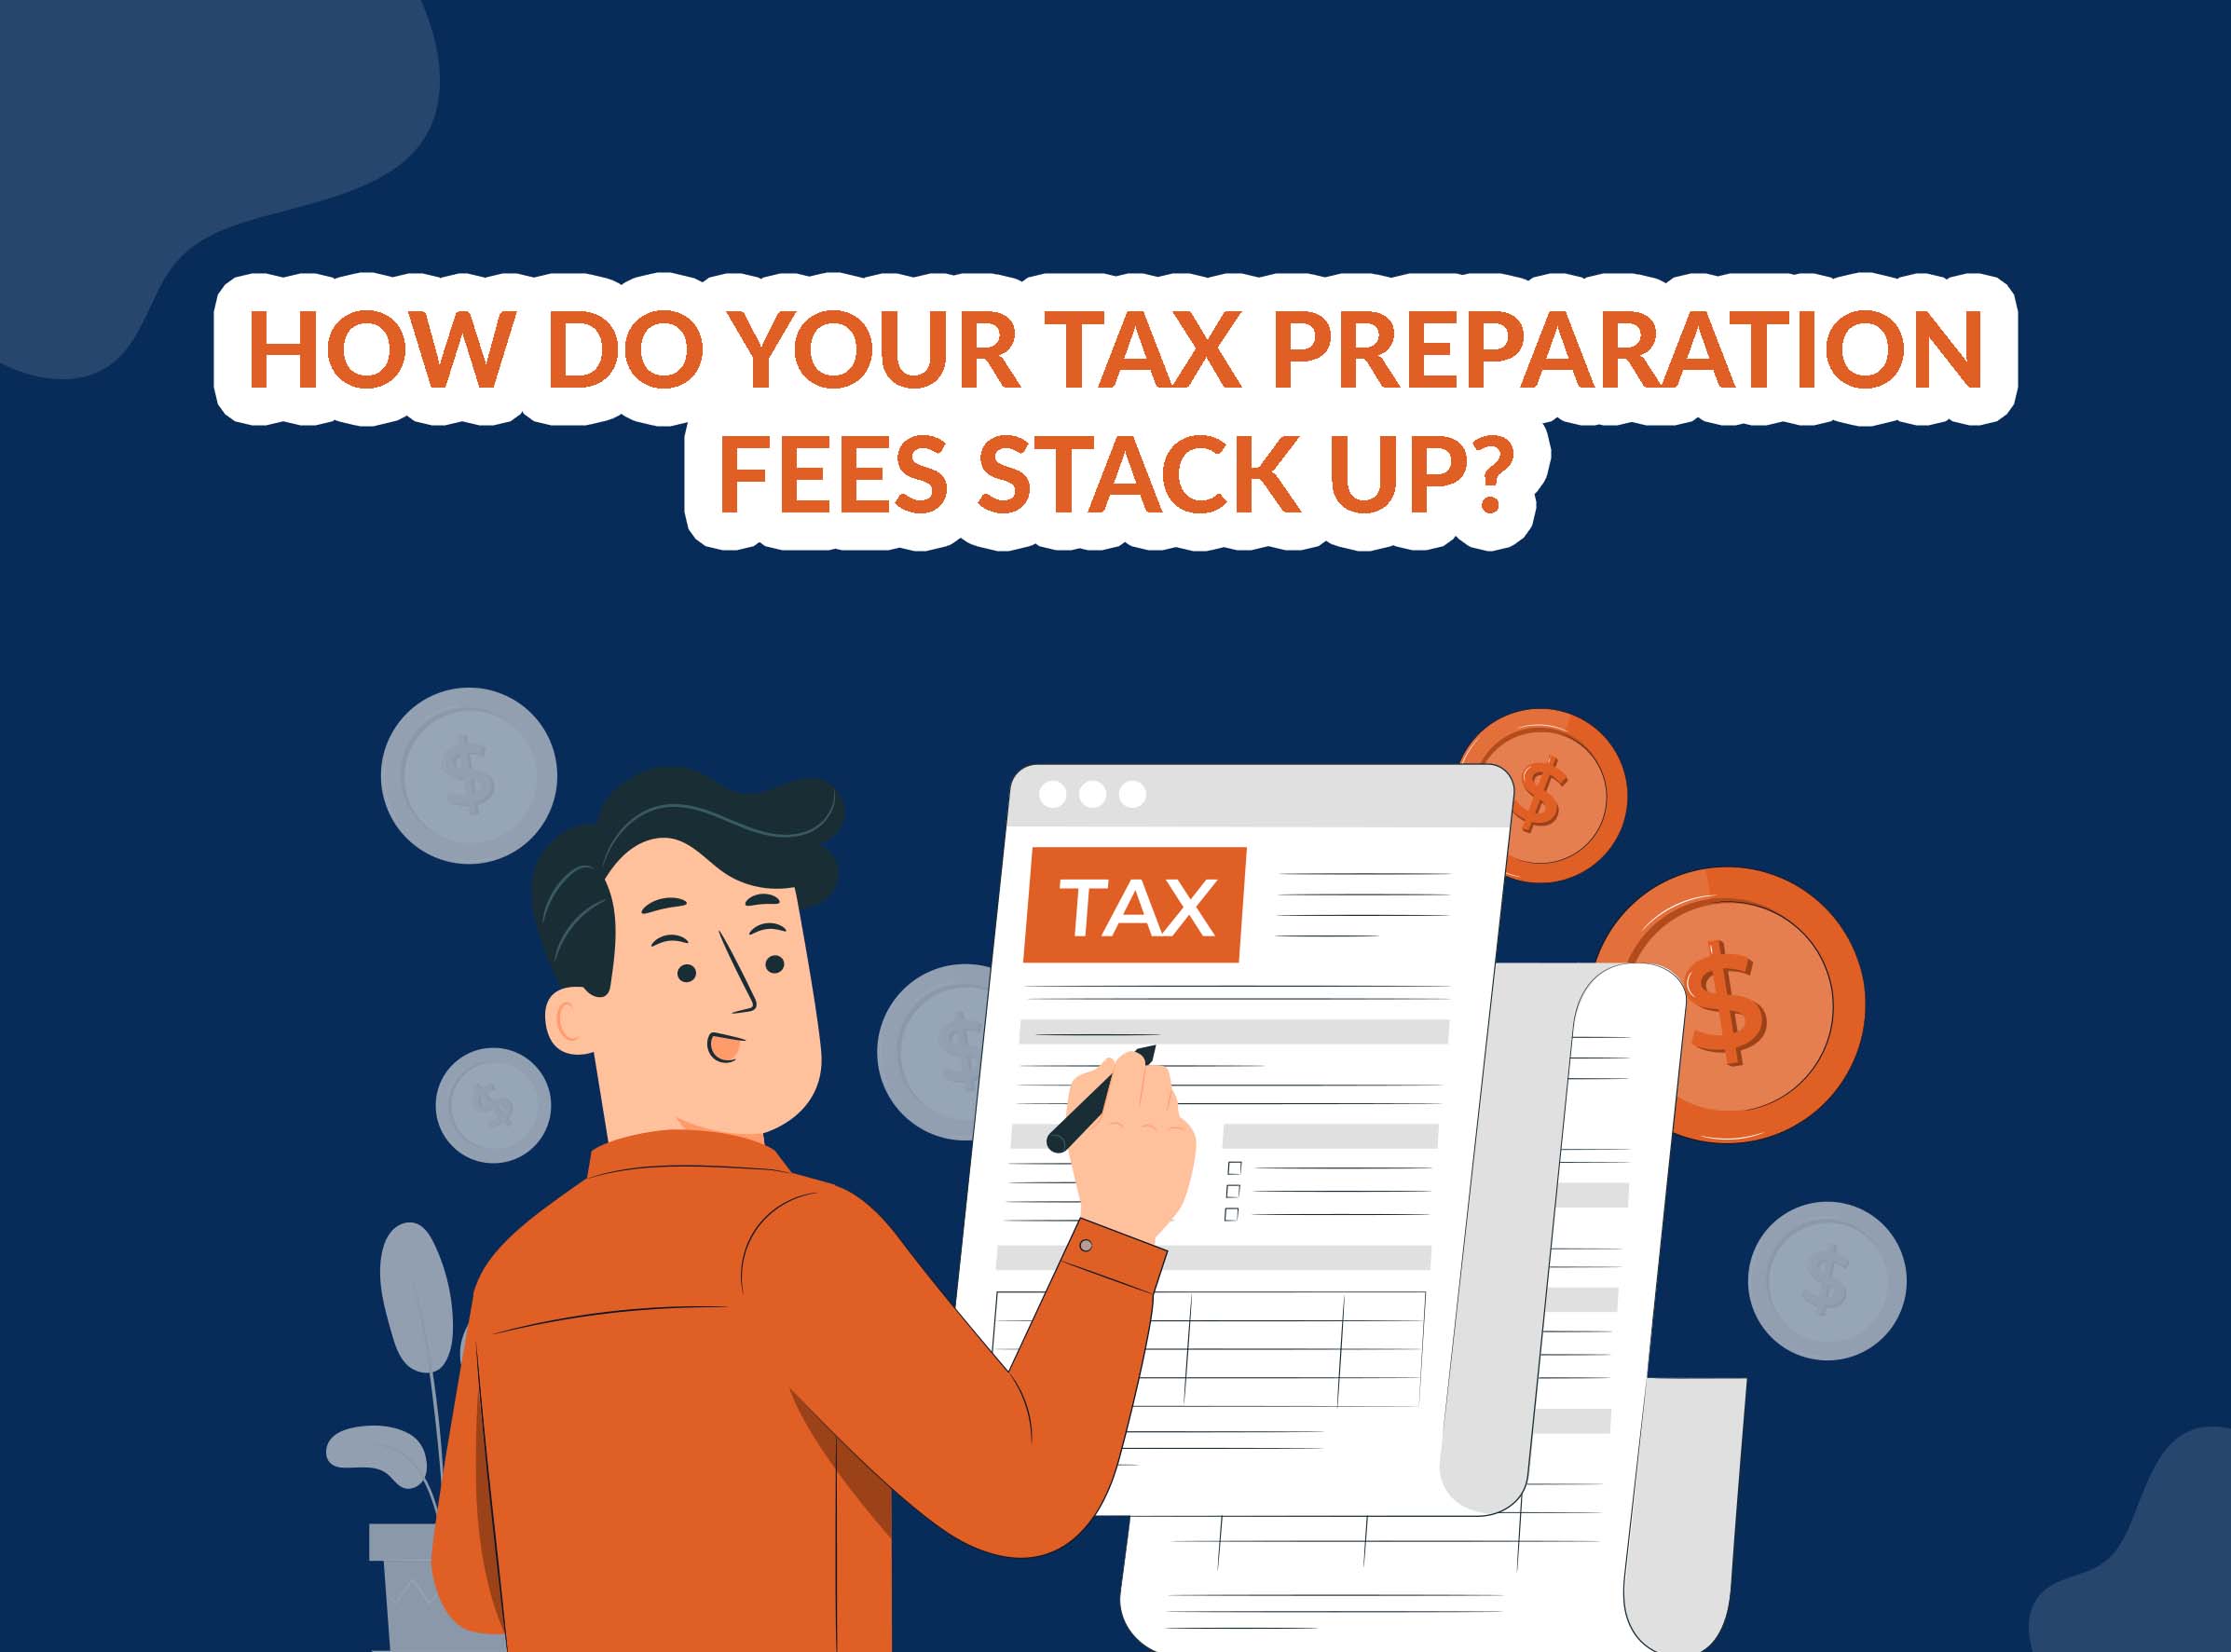 How do Your Tax Preparation Fees Stack Up?